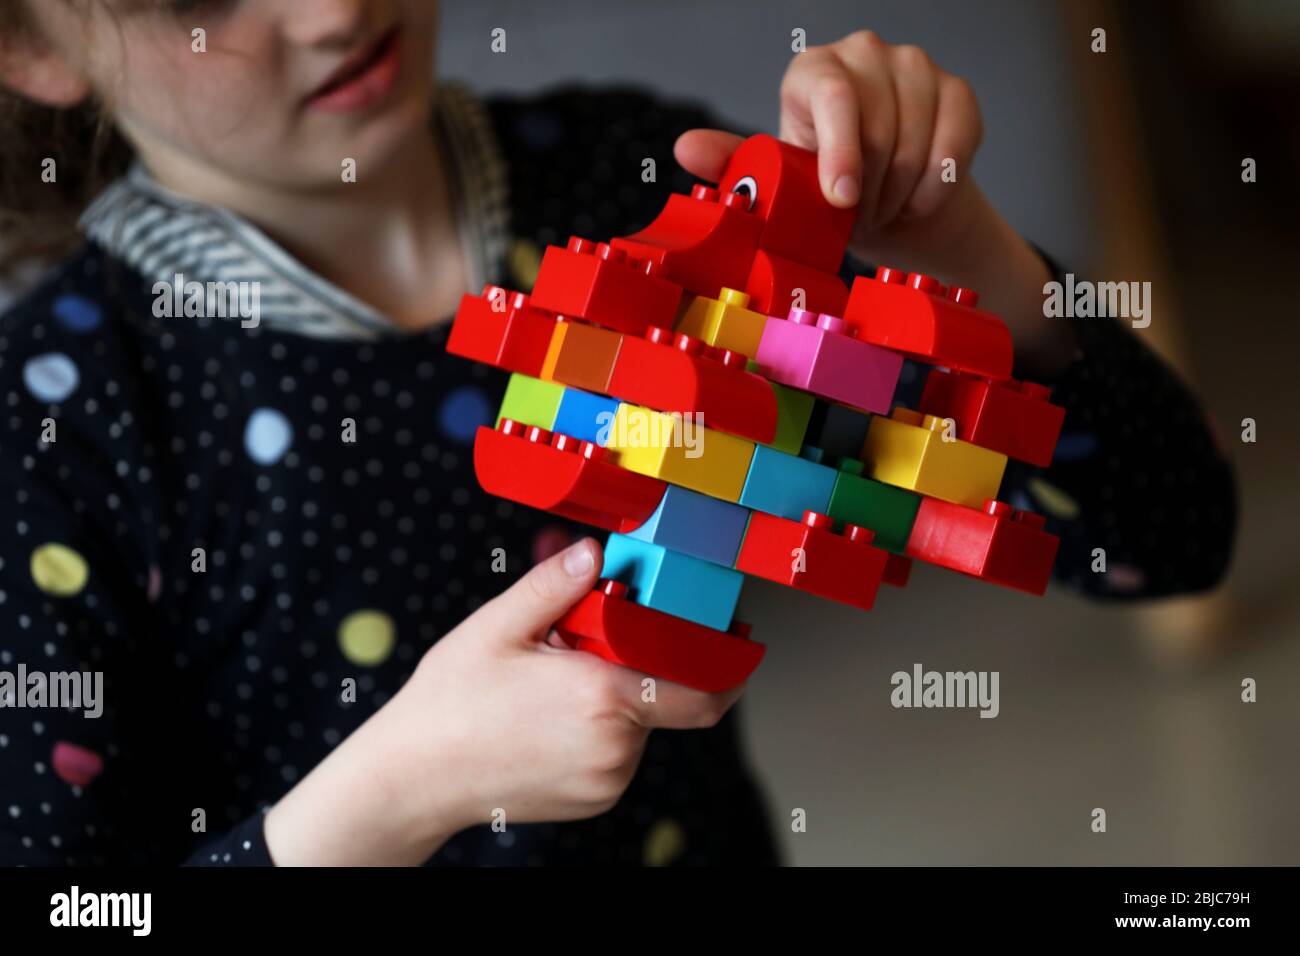 Chichester, West Sussex, UK - Isabelle, 8, pictured making and playing with a Coronavirus germ she made out of Lego Duplo whilst being homeschooled due to the Coronavirus (Covid-19) pandamic. Wednesday 29th April 2020 © Sam Stephenson / Alamy Live News. Stock Photo